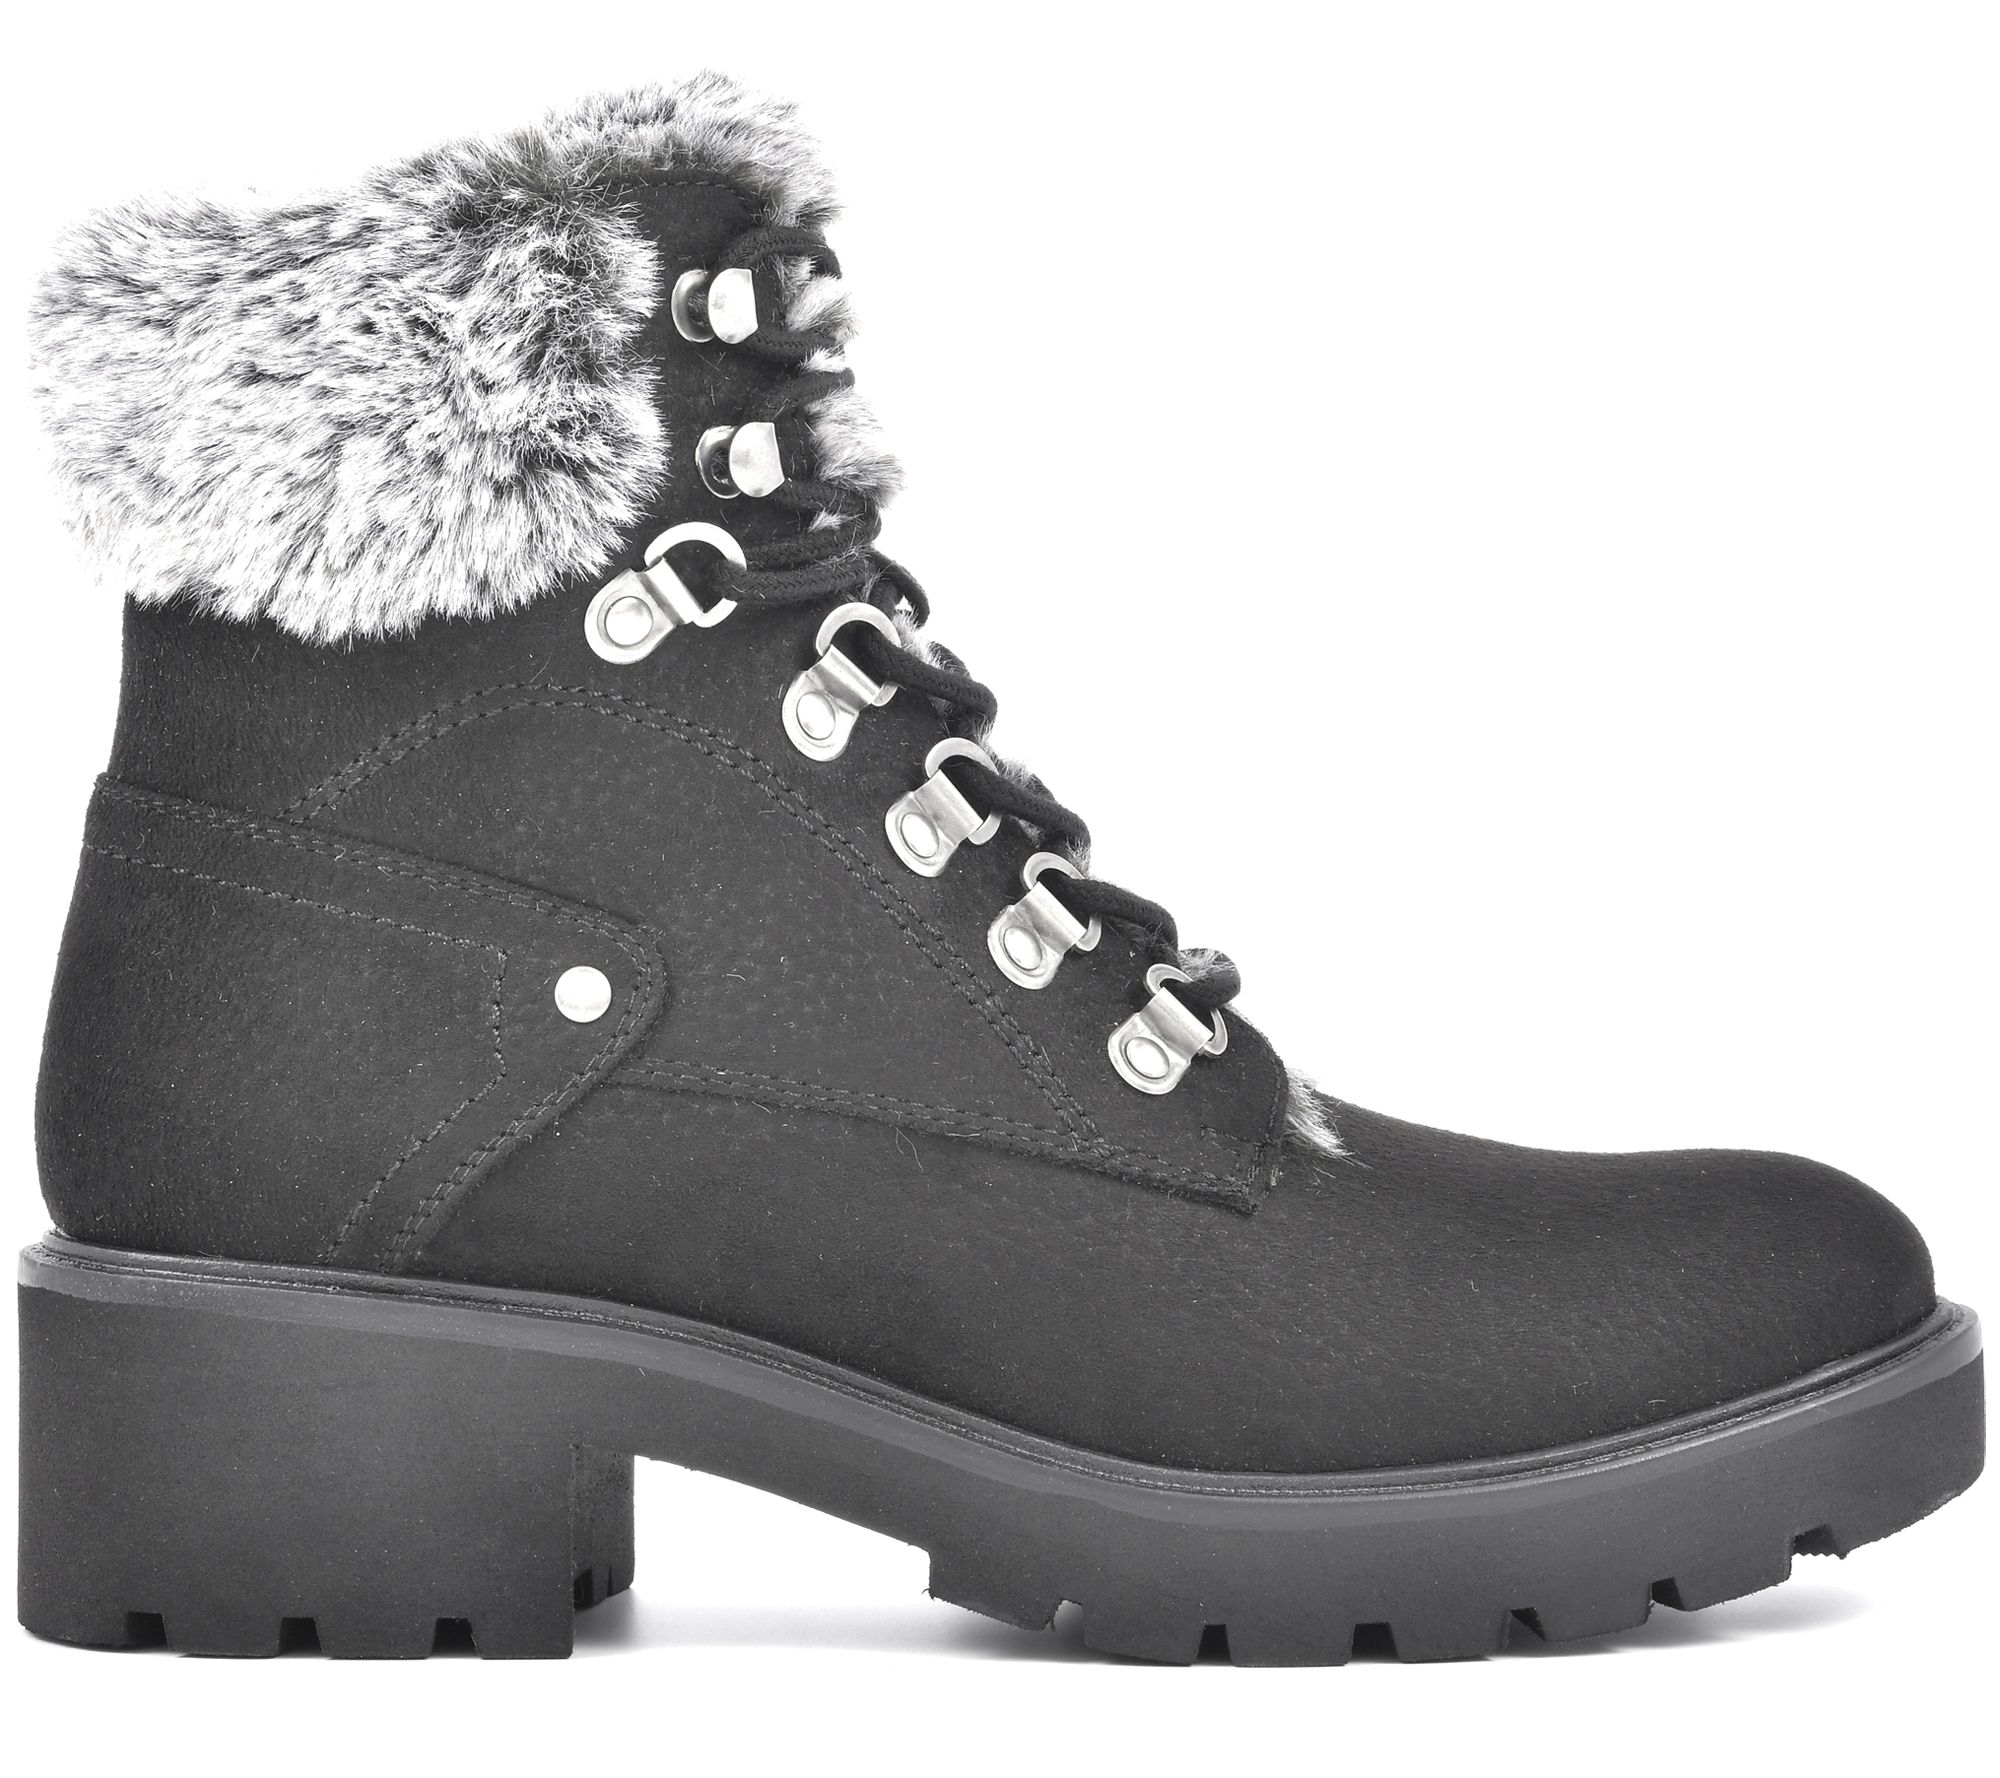 White Mountain Lug Sole Hiker-Inspired Boots -Deserve - QVC.com